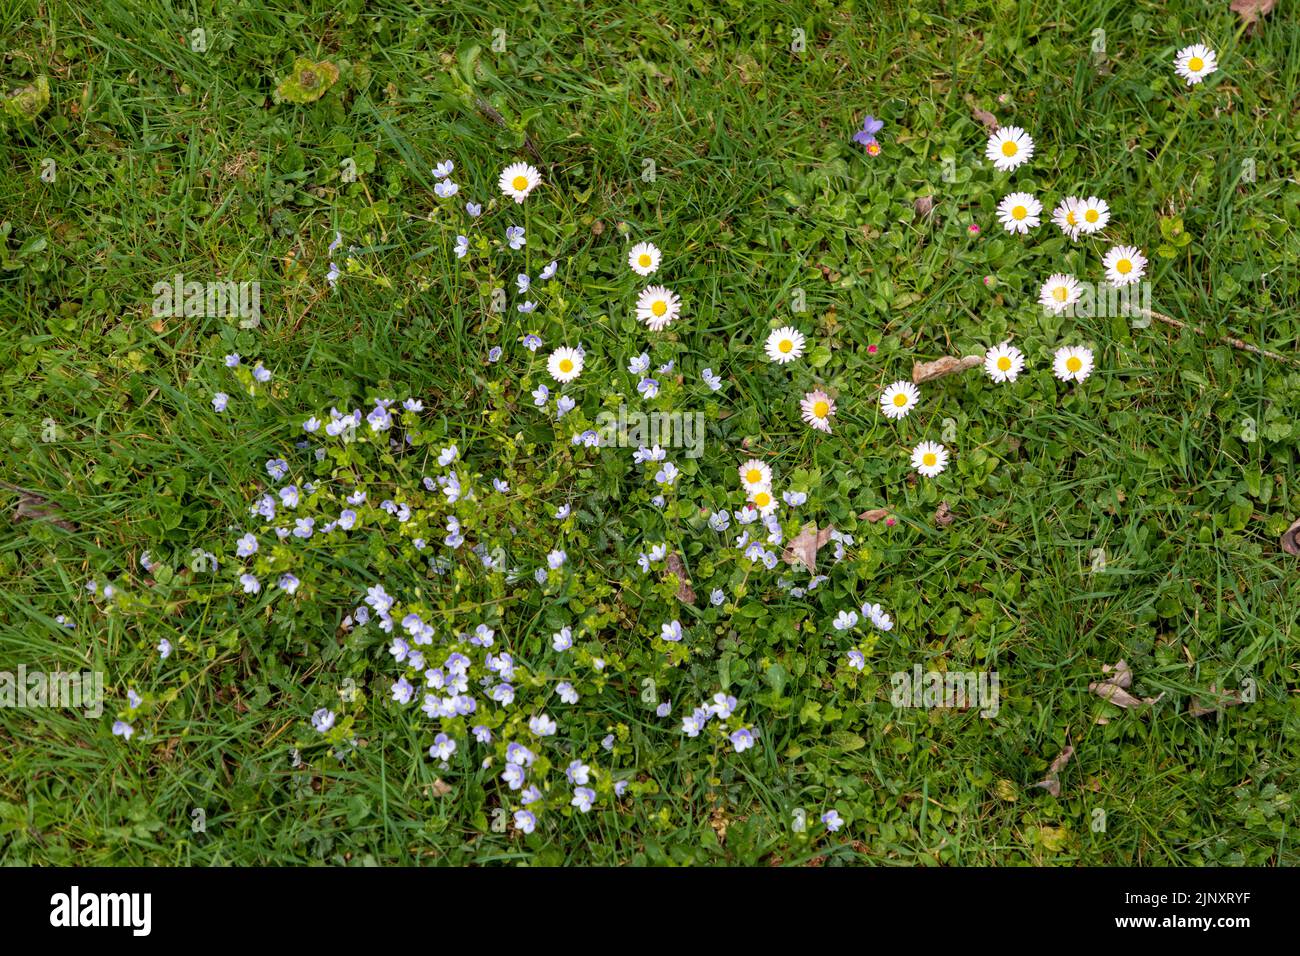 Wild flowers growing on a patch of grass in Switzerland during springtime. Stock Photo